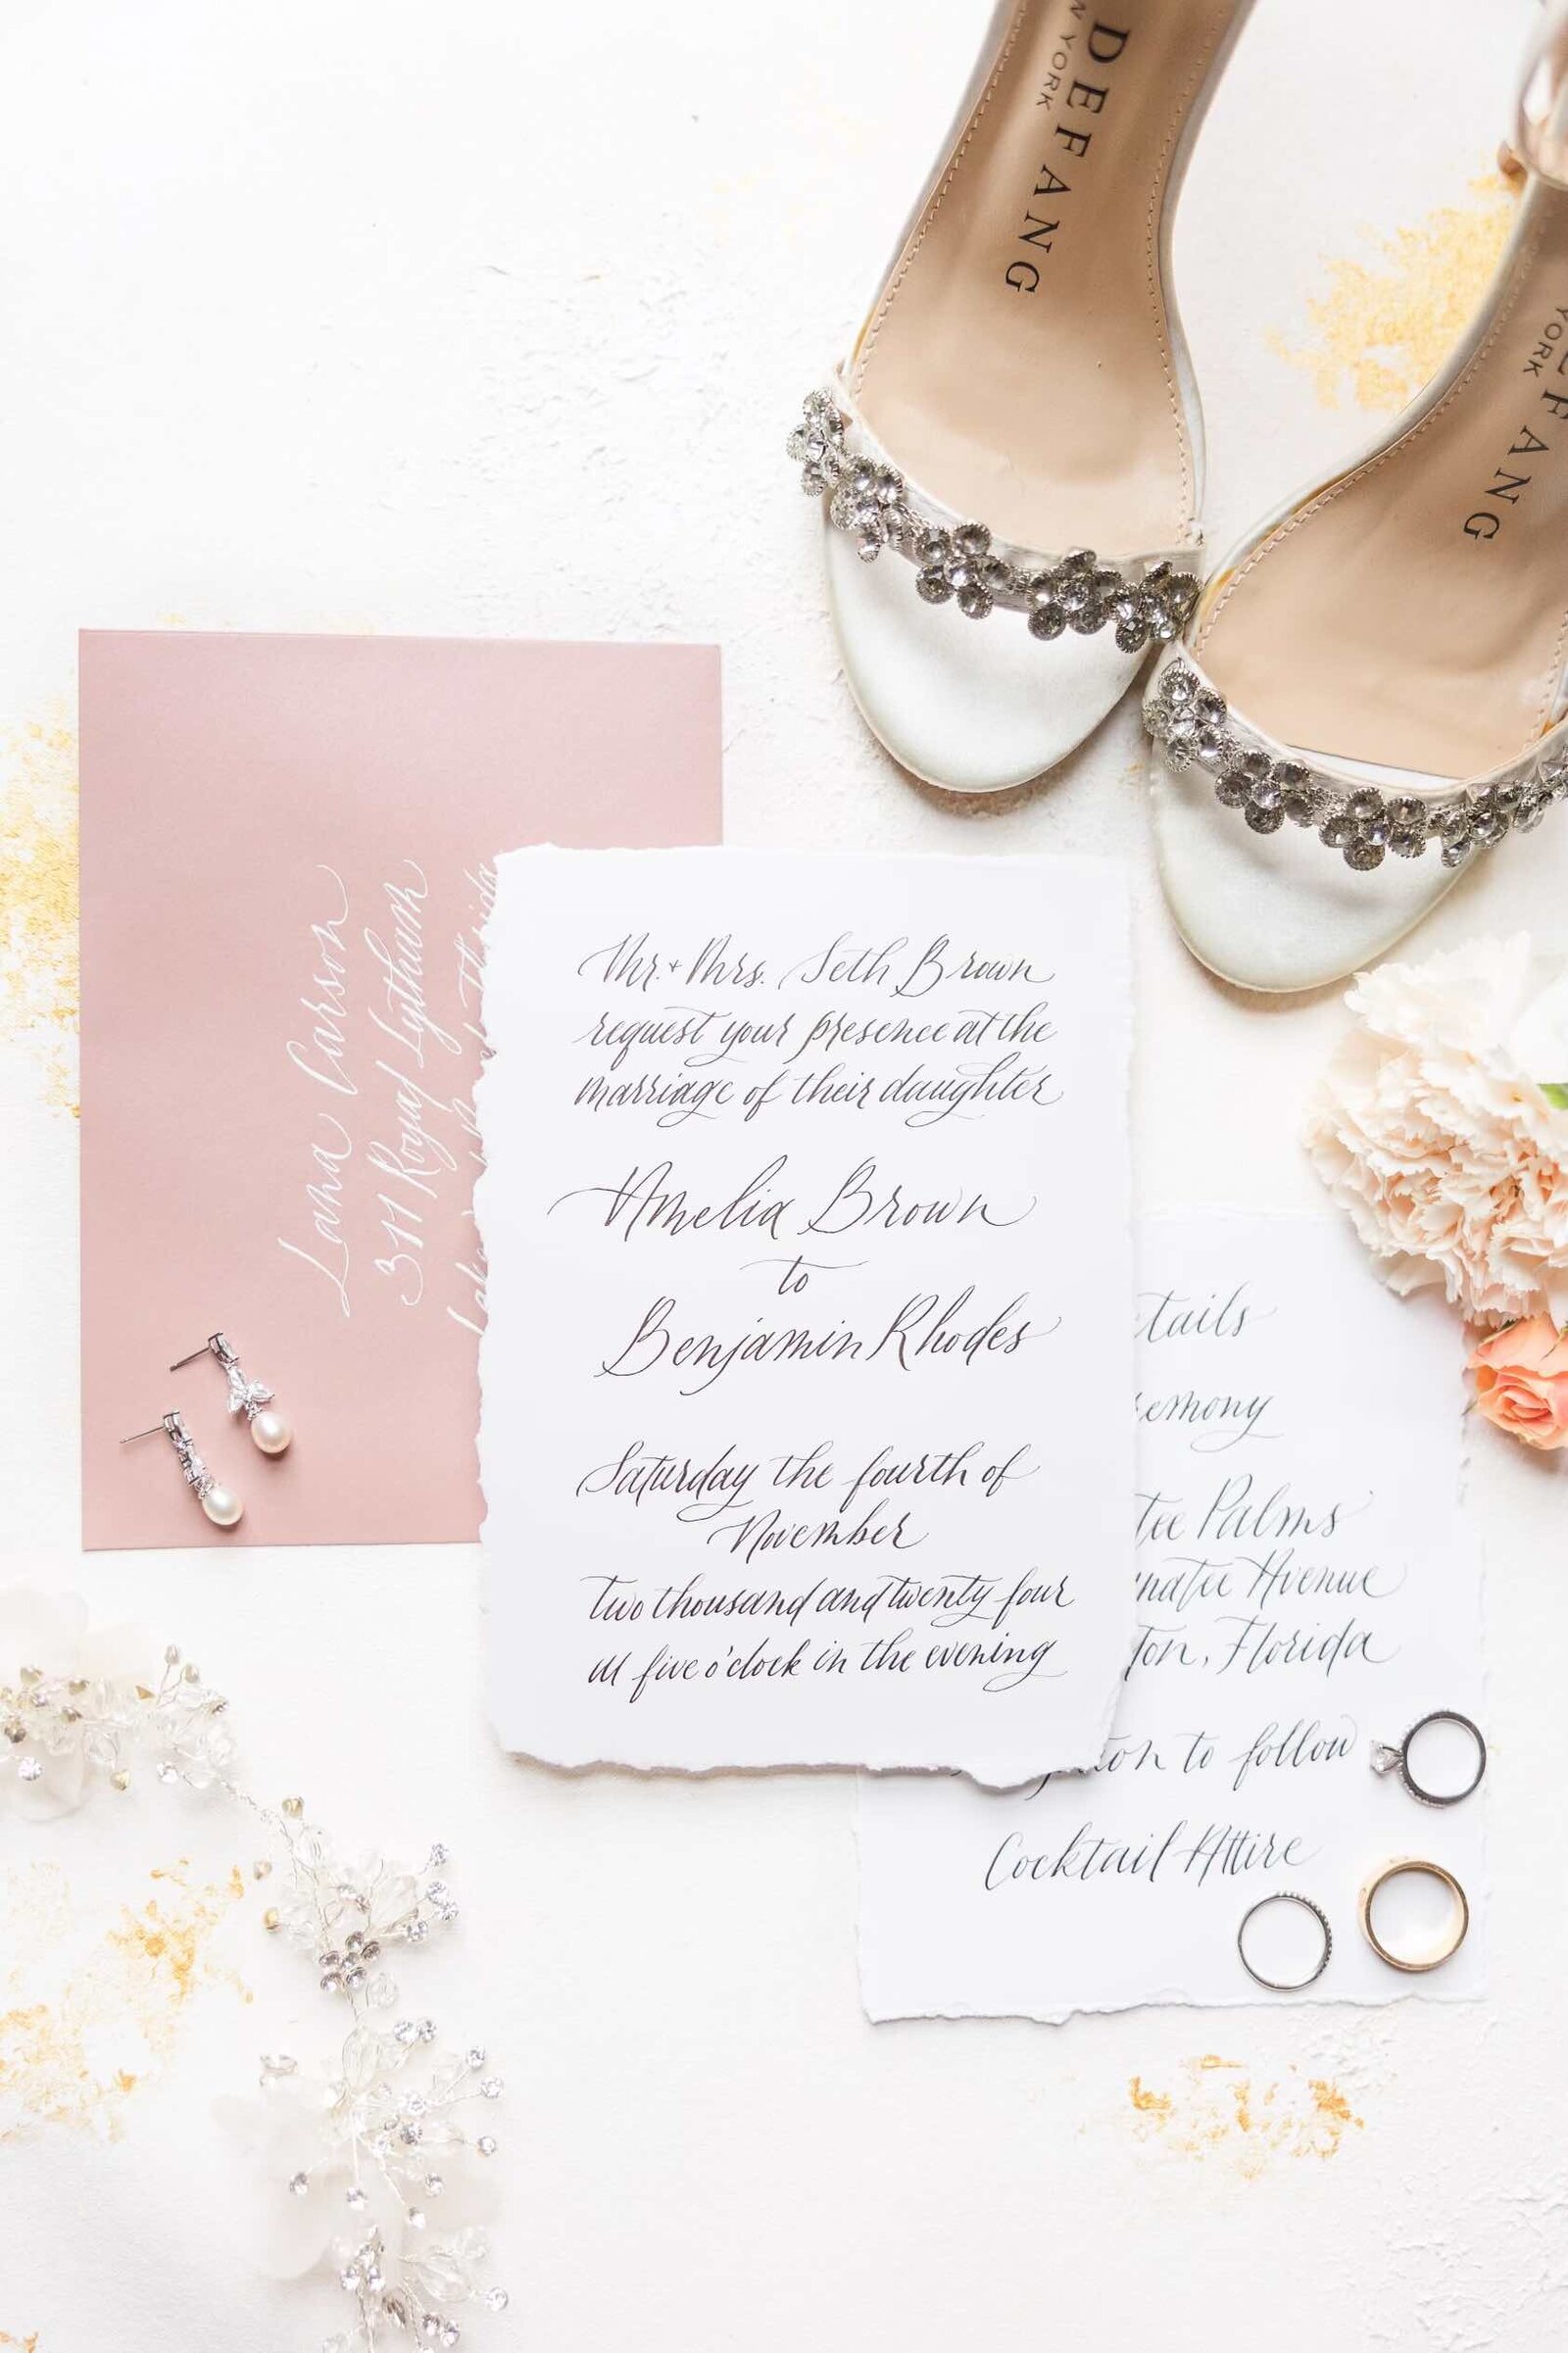 handwritten invitation suite, rings, wedding shoes, calligraphy envelope, and florals scattered around the invites